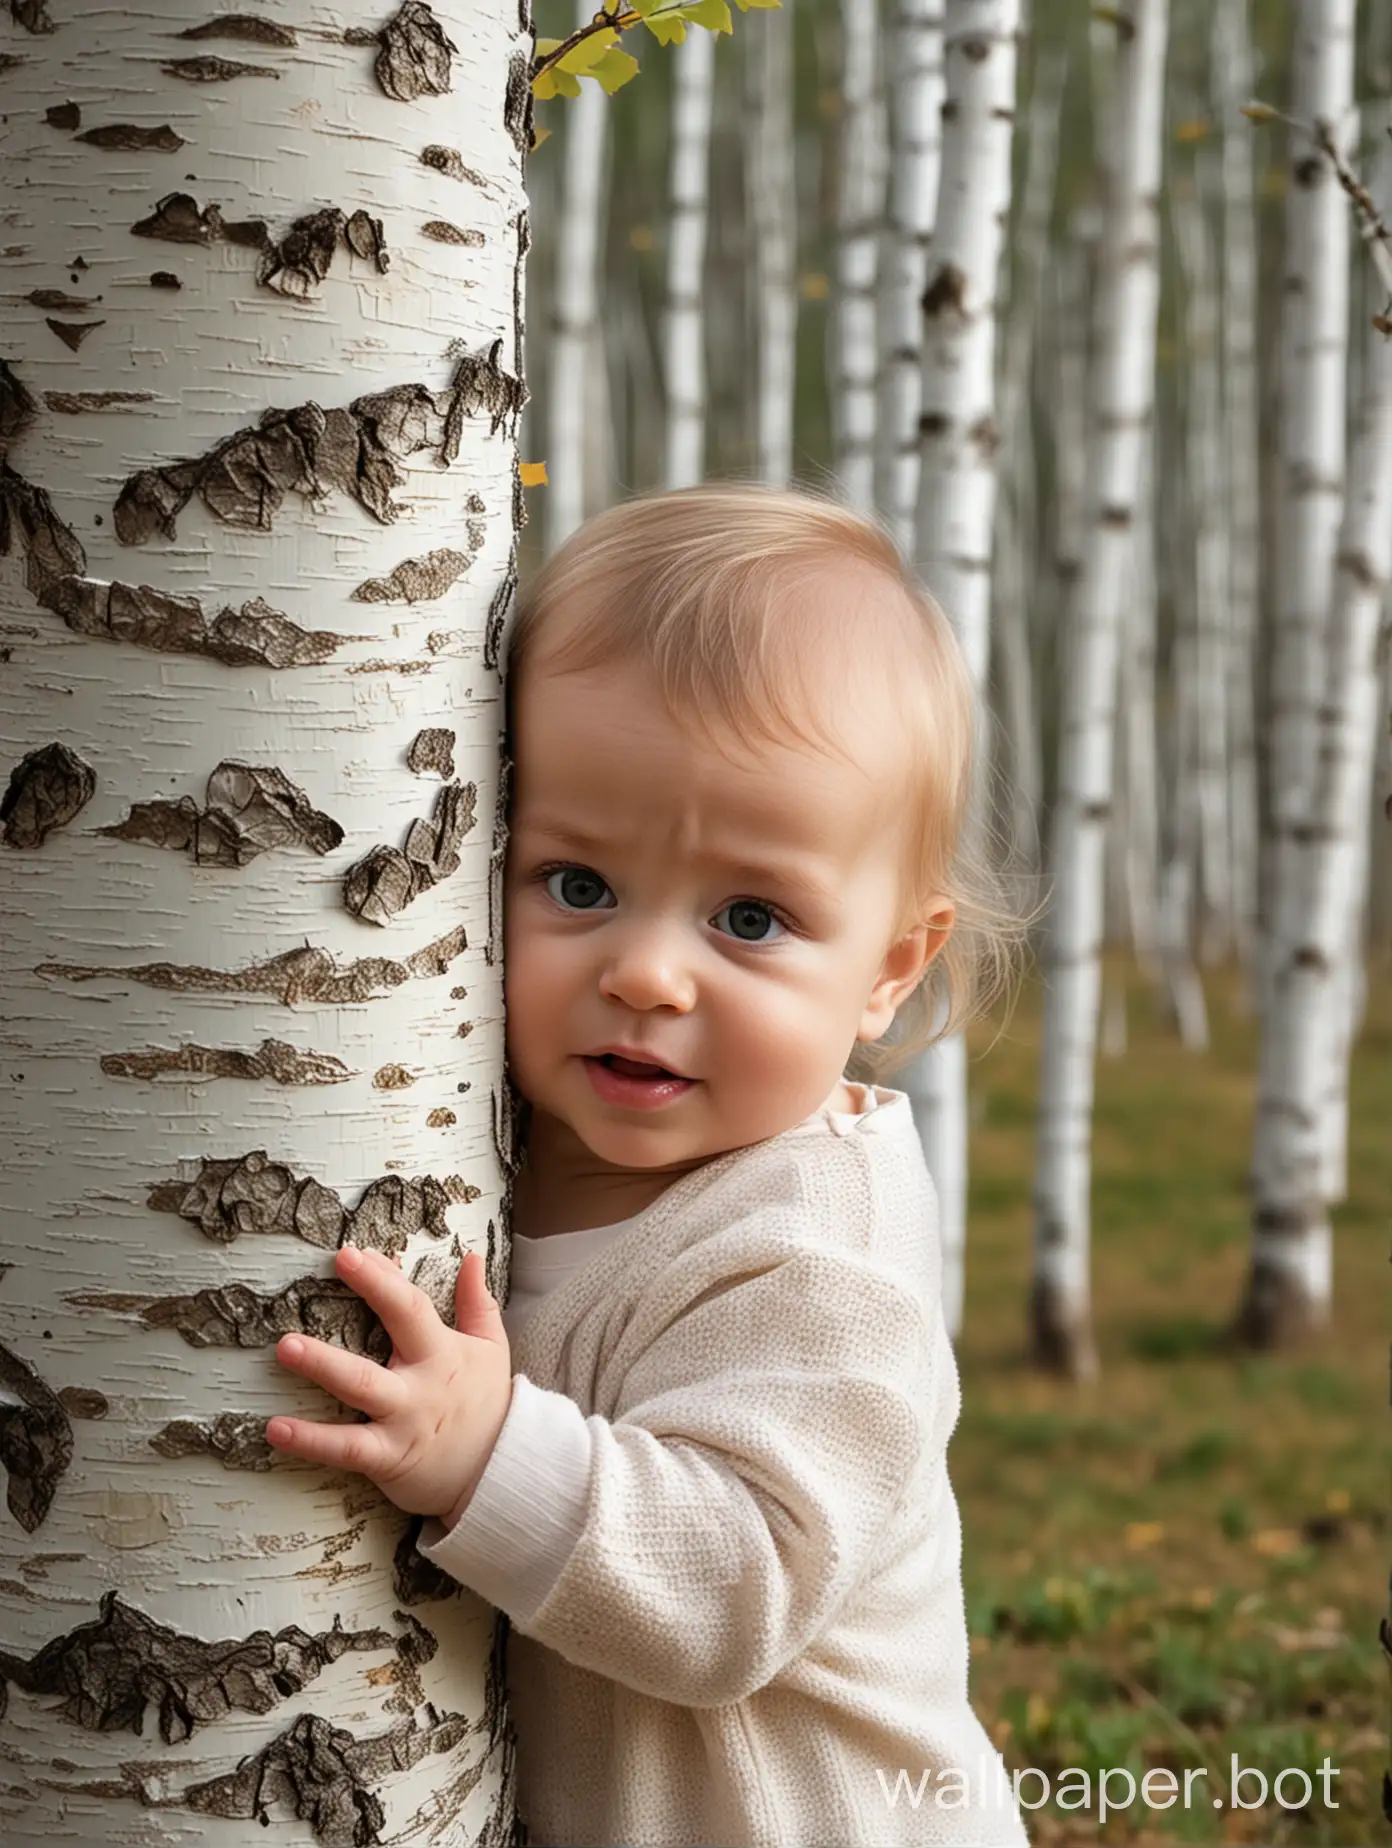 Adorable-Baby-Embracing-Birch-Tree-with-Tender-Affection